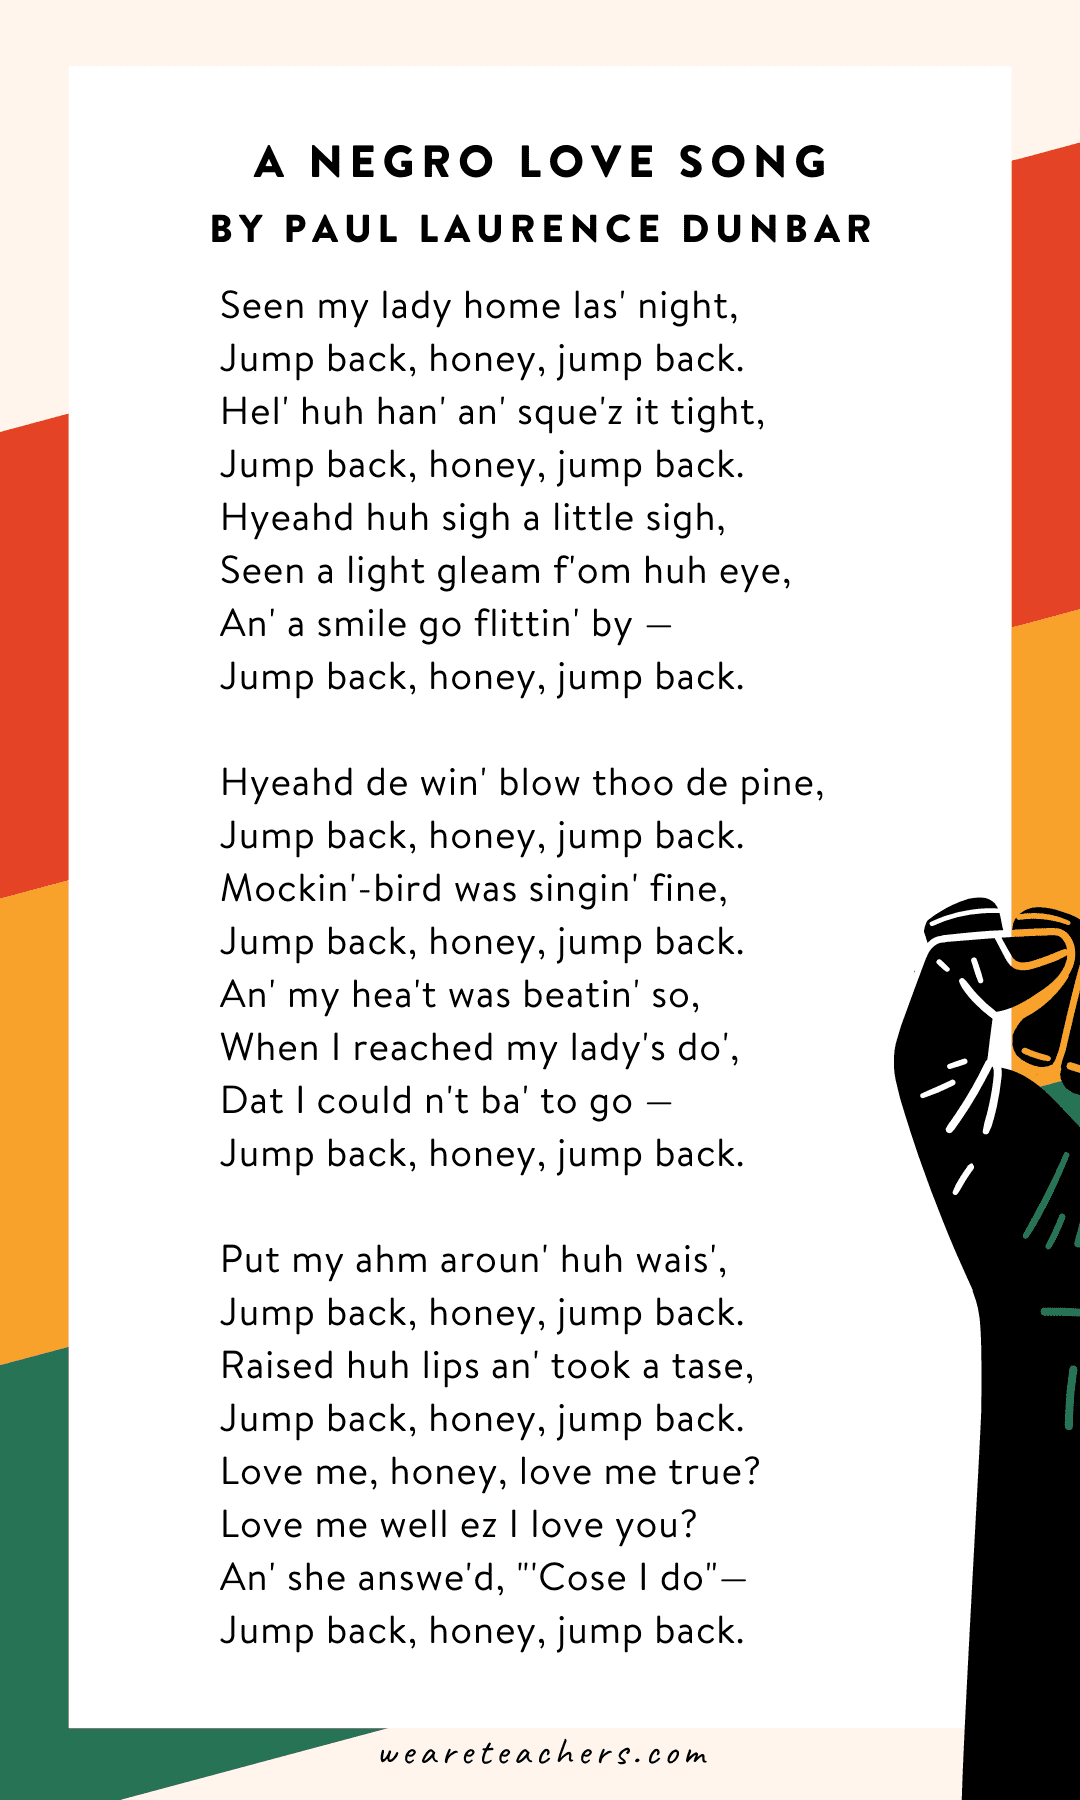 A Negro Love Song by Paul Laurence Dunbar “Seen my lady home las' night…”, as an example of Black History Month Poems for Kids